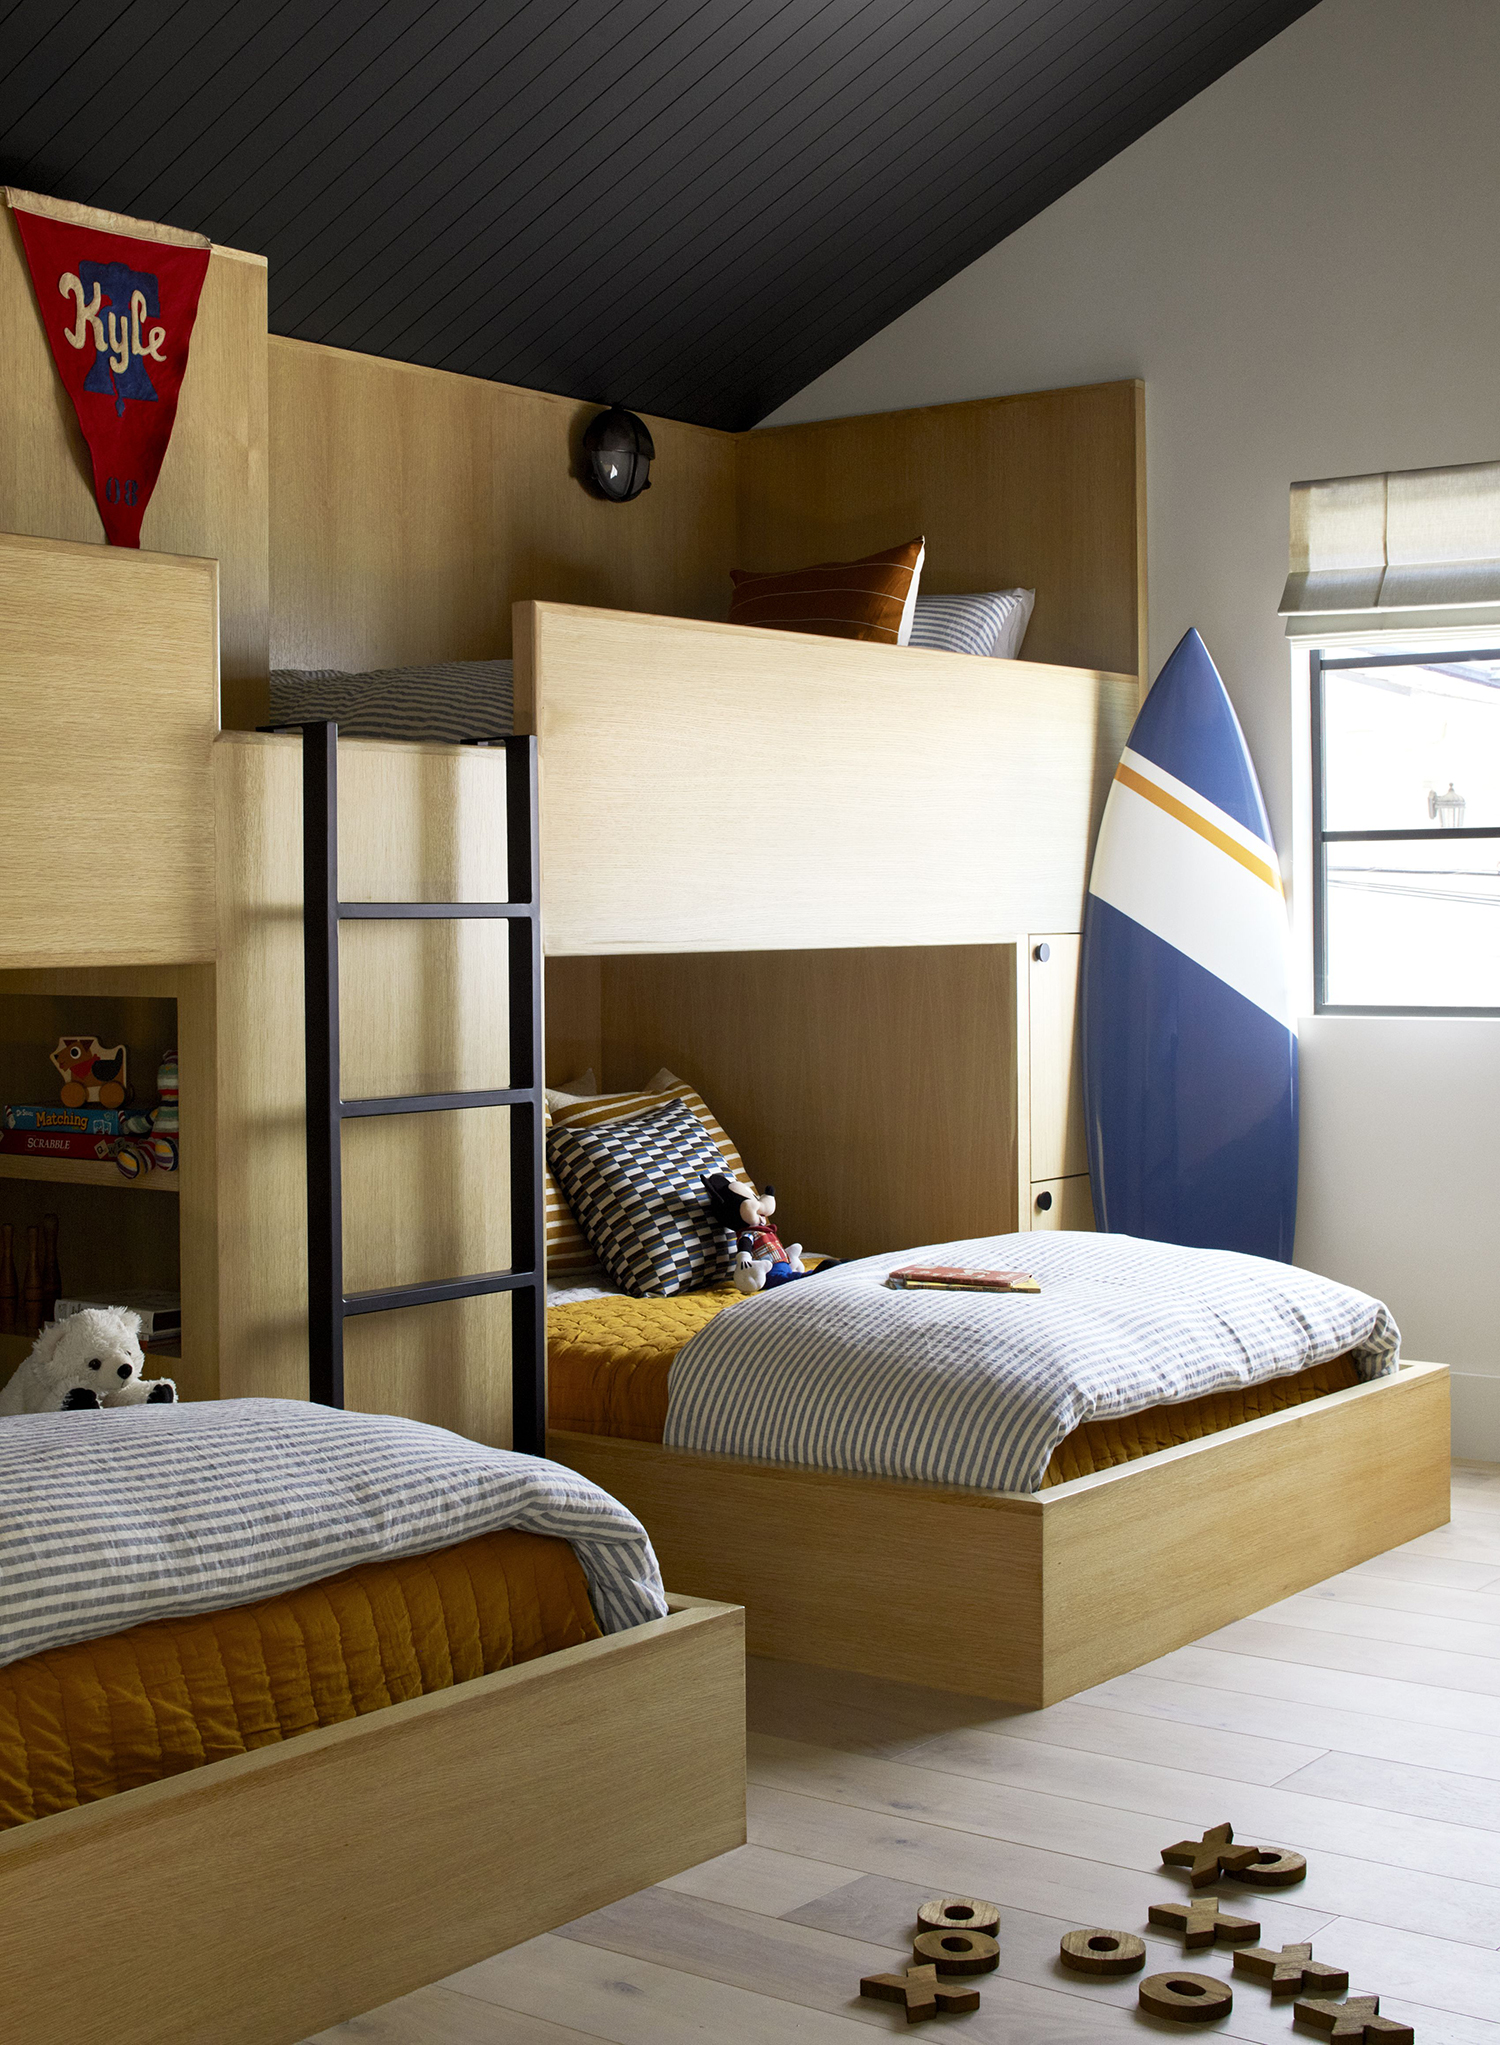 Queen Sized Bunk Beds by Raili Clasen